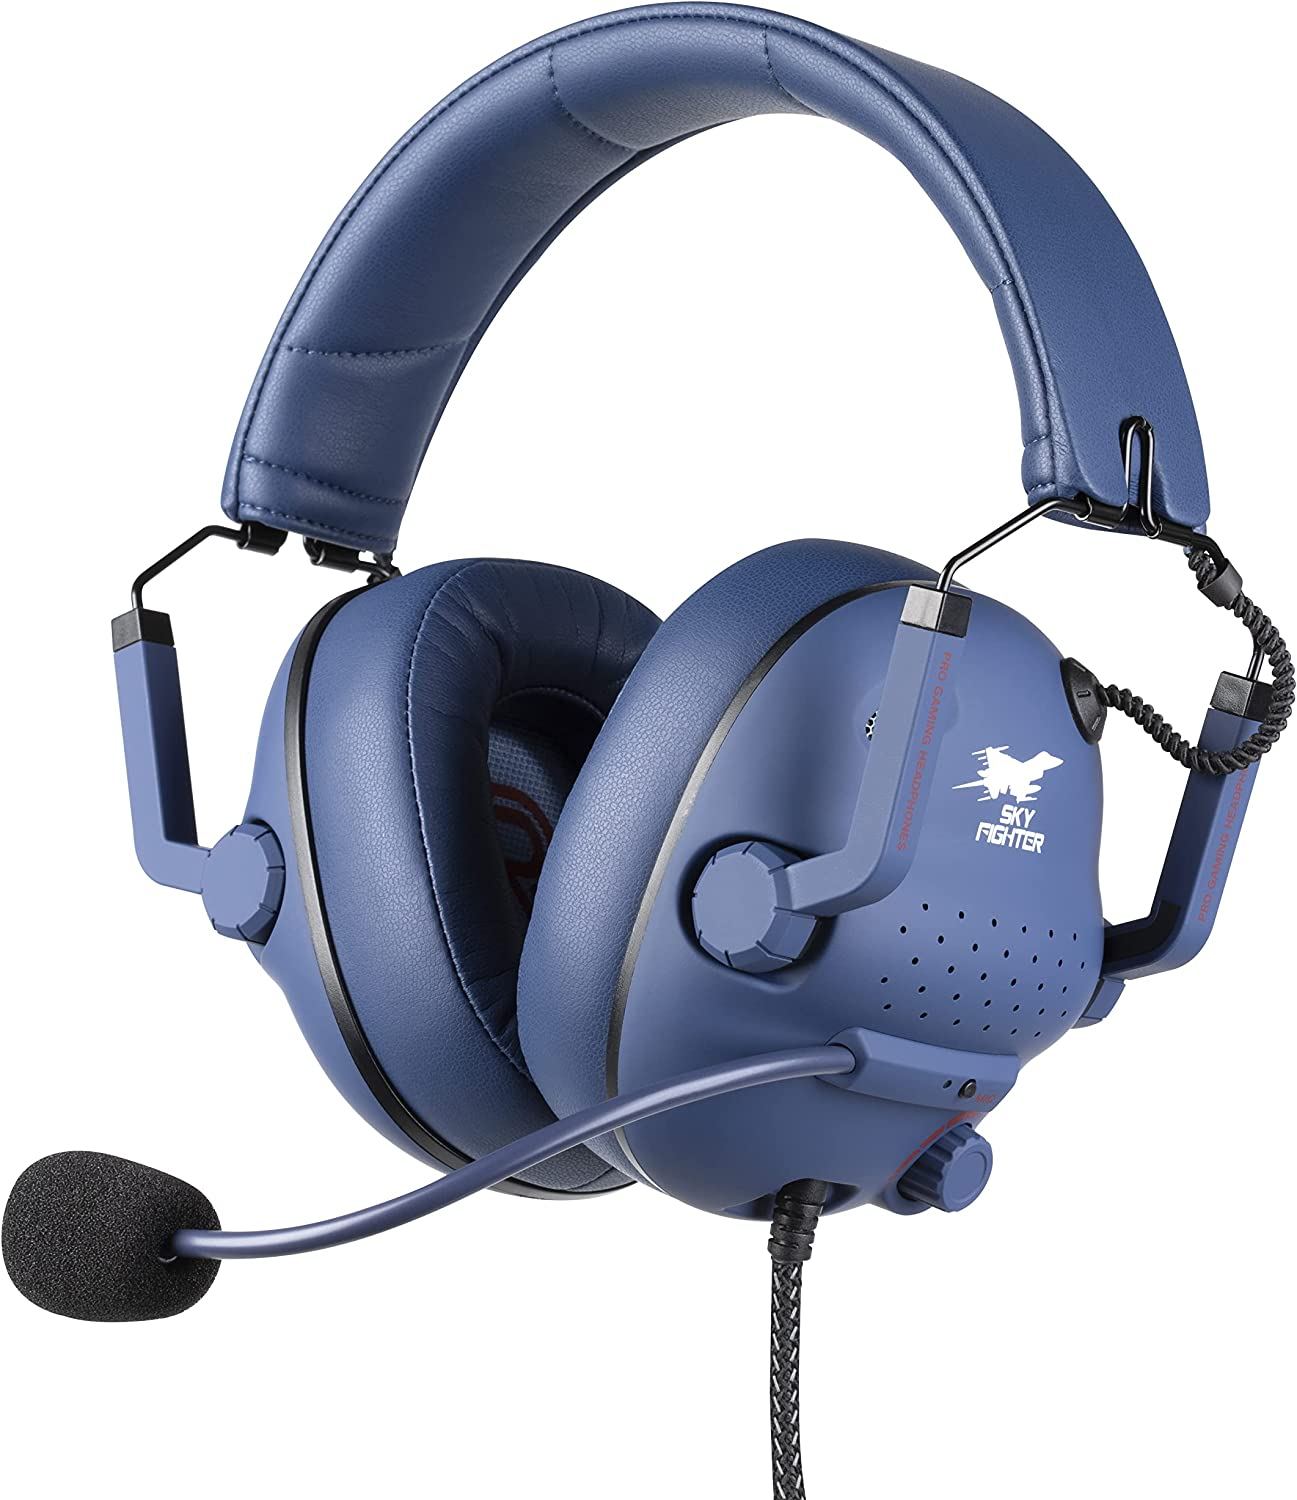 for for (Blue) Skyfighter PC Konix Windows Gaming Headset